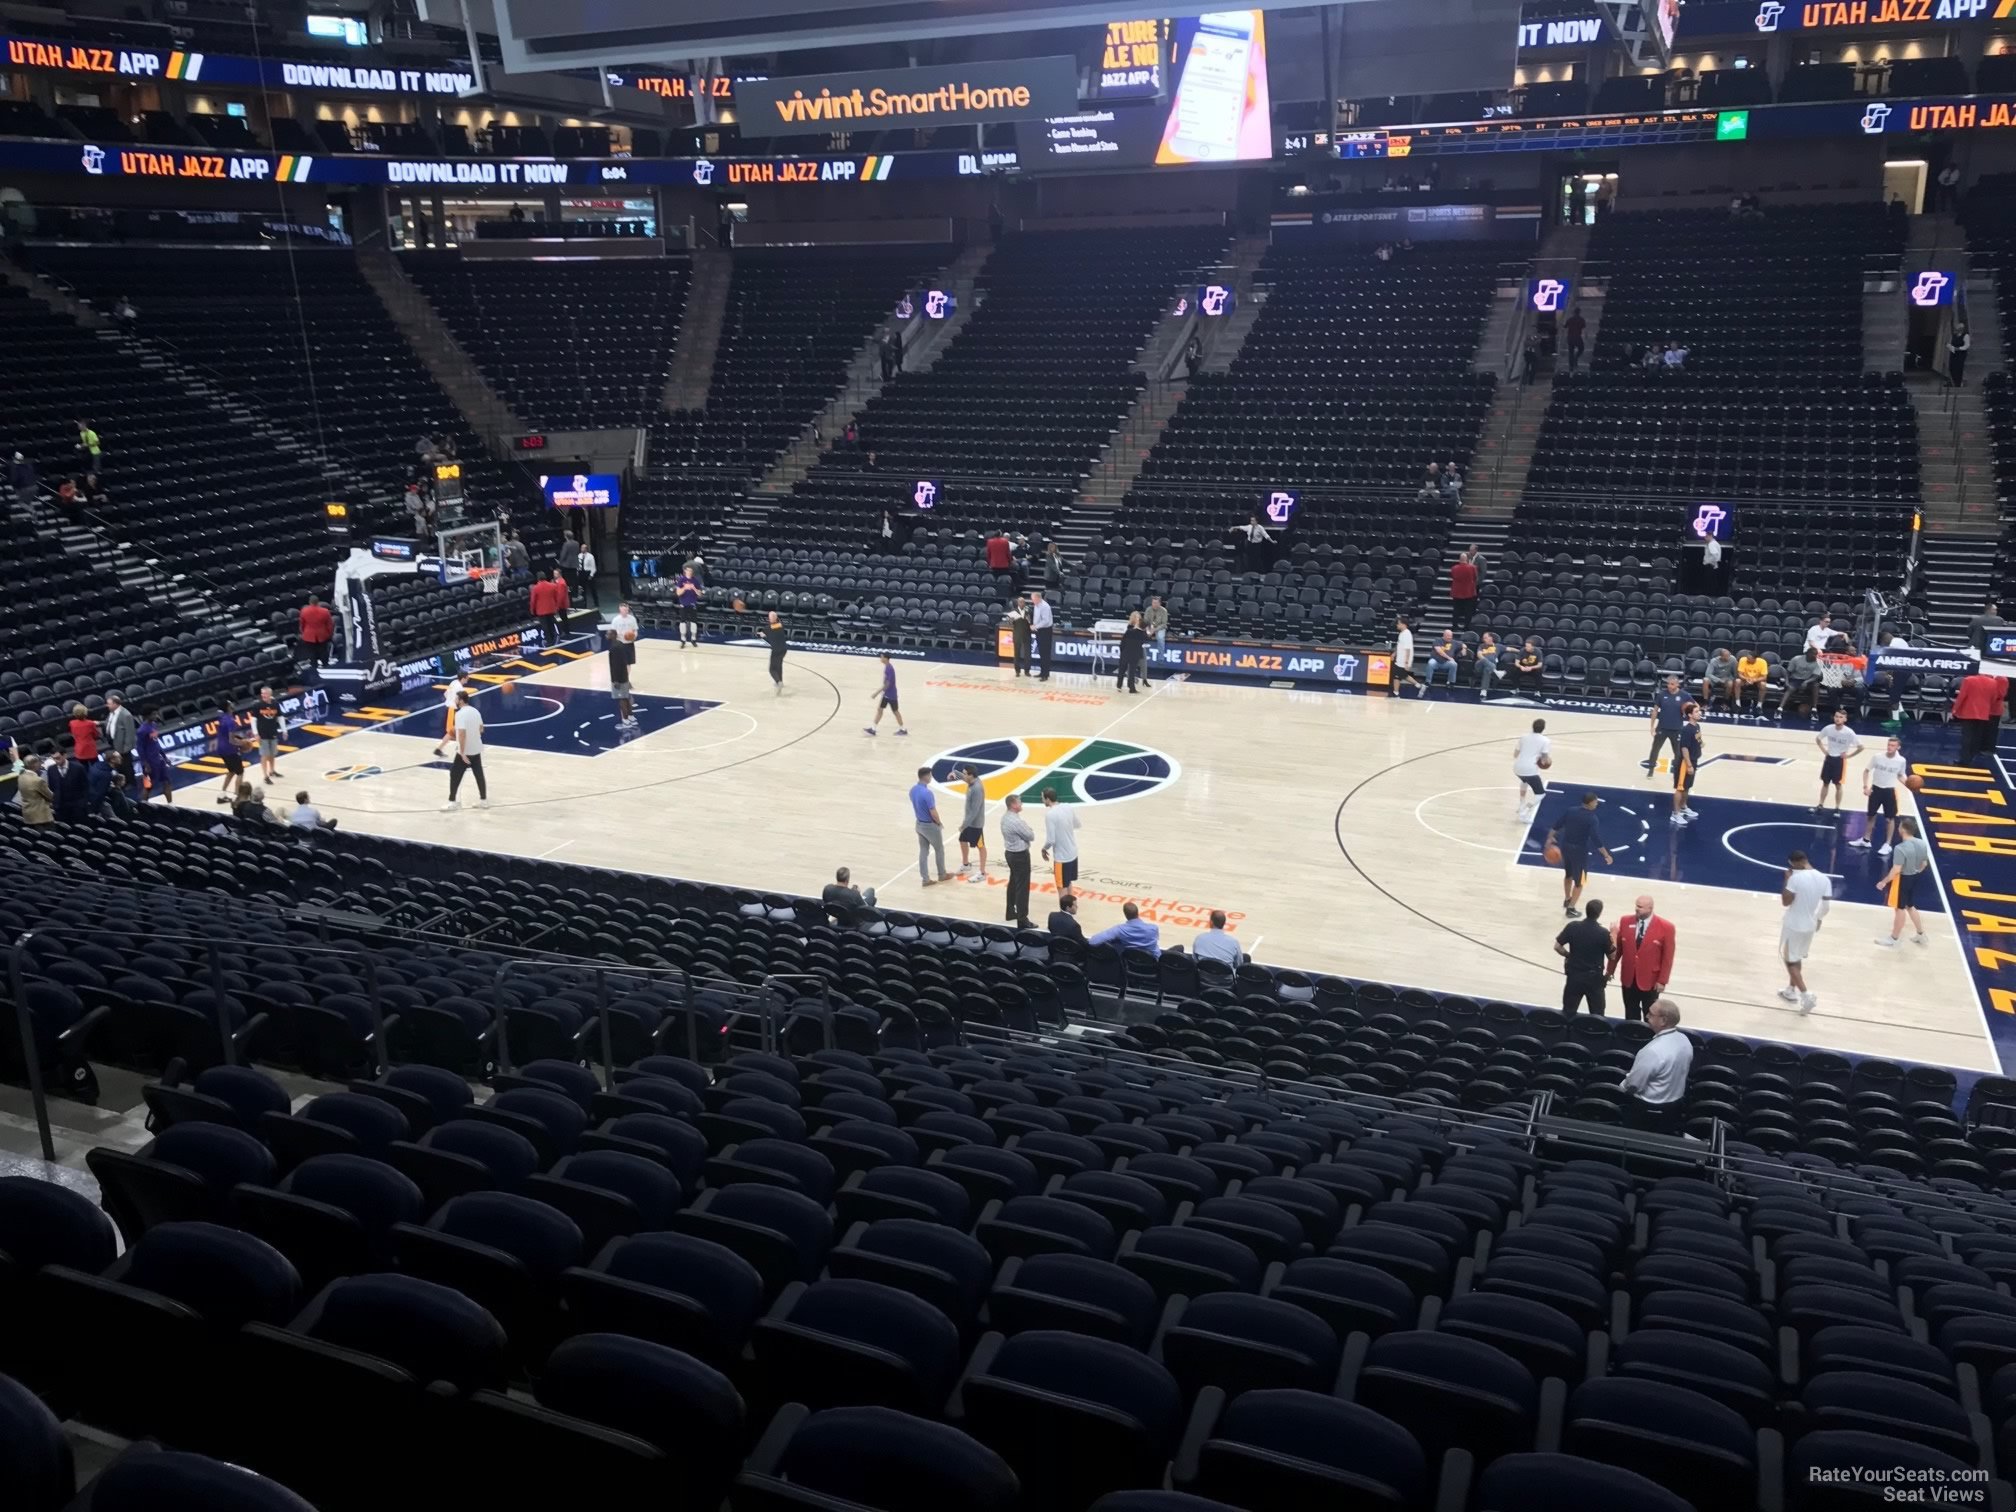 section 17, row 20 seat view  for basketball - vivint arena